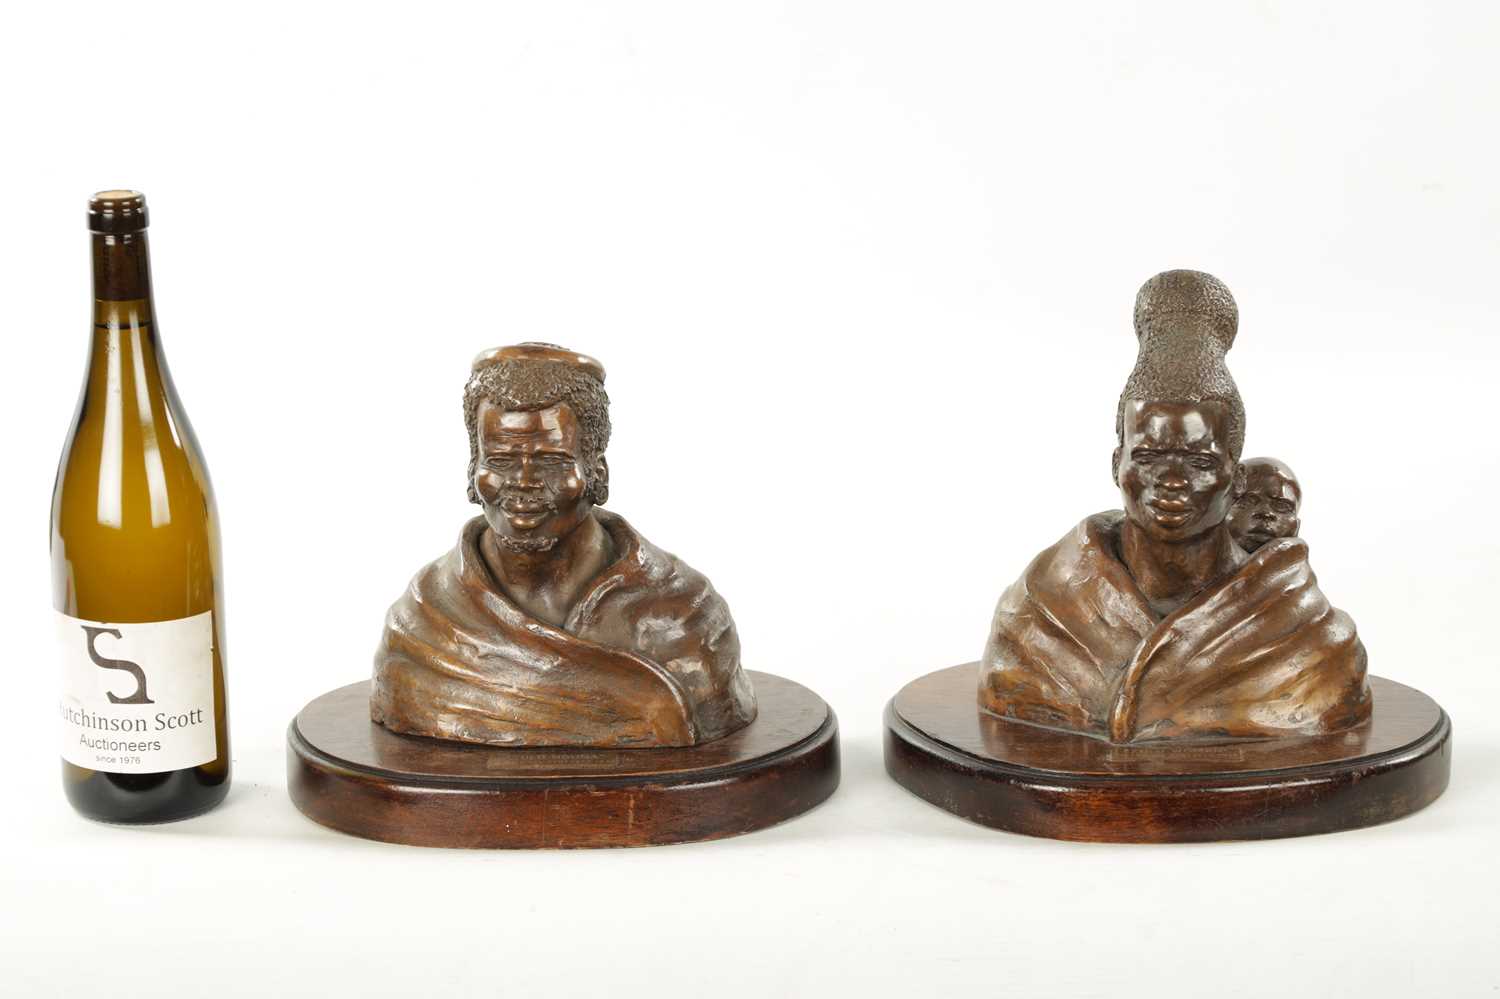 A PAIR OF 20TH CENTURY BRONZE SCULPTURES DEPICTING A ZULU WOMEN AND MAN BY PIERRE VAN RYNEVELD SIGNE - Image 2 of 10